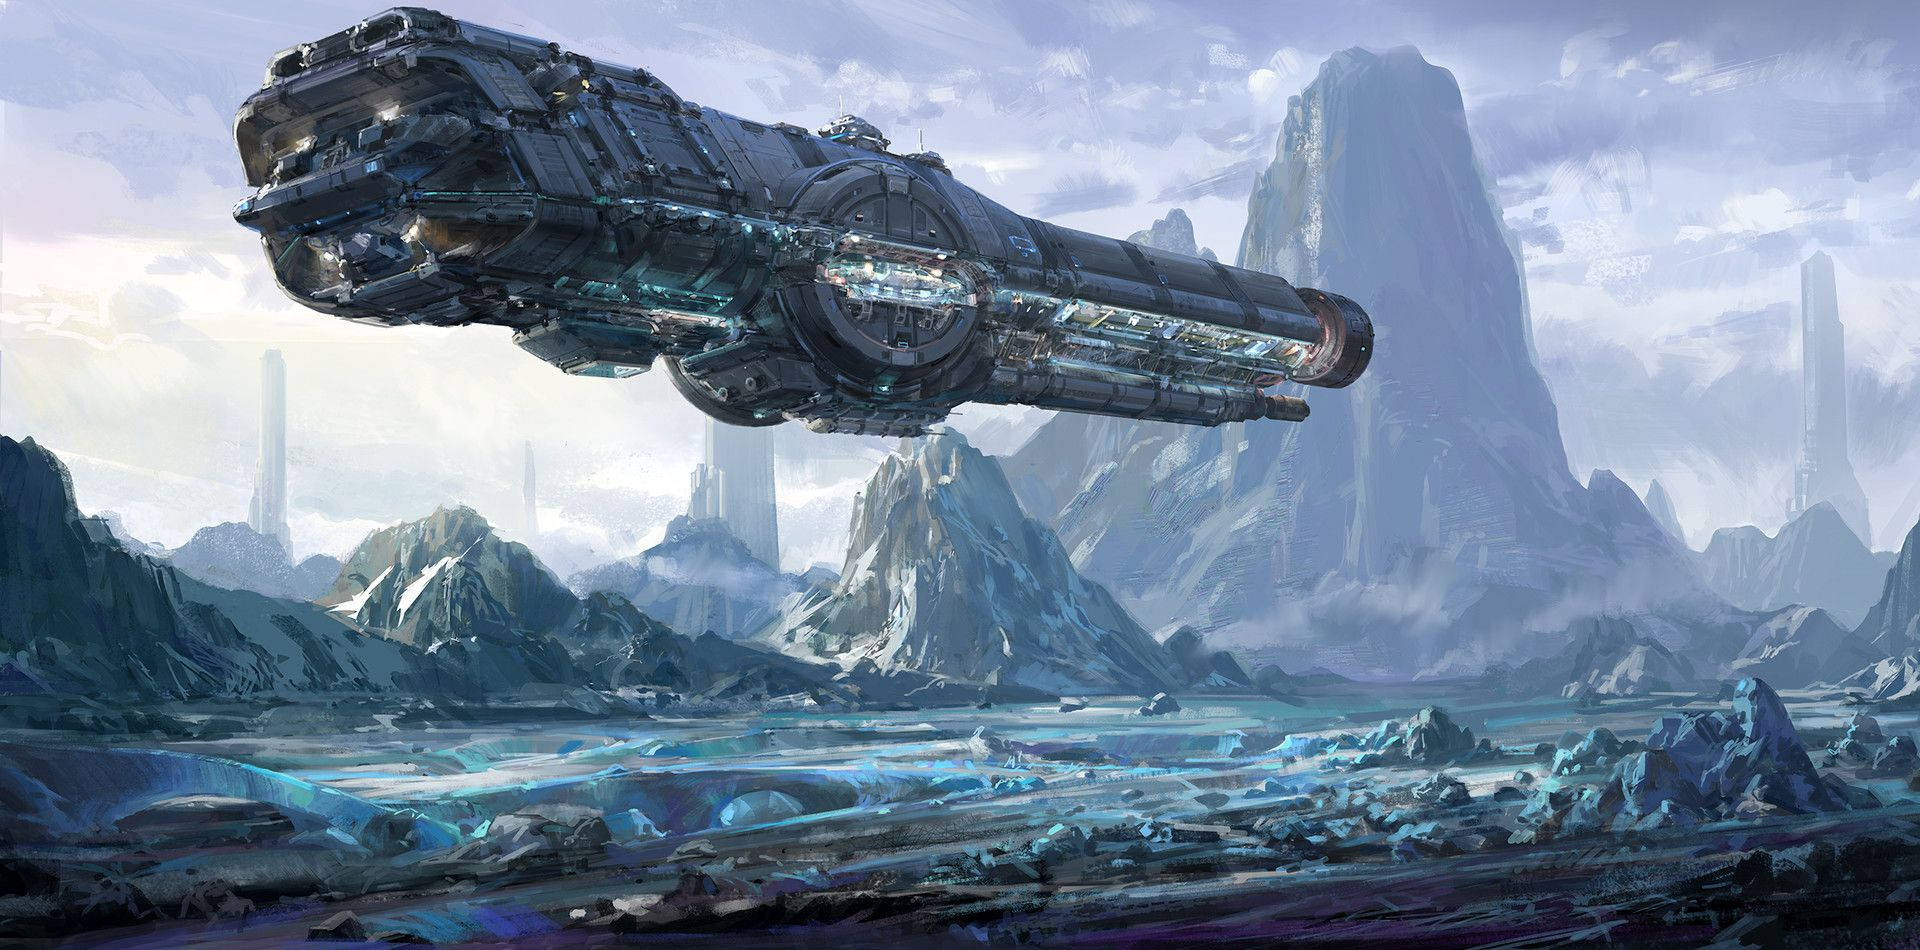 Sci-fi Spaceship In The Mountains Wallpaper